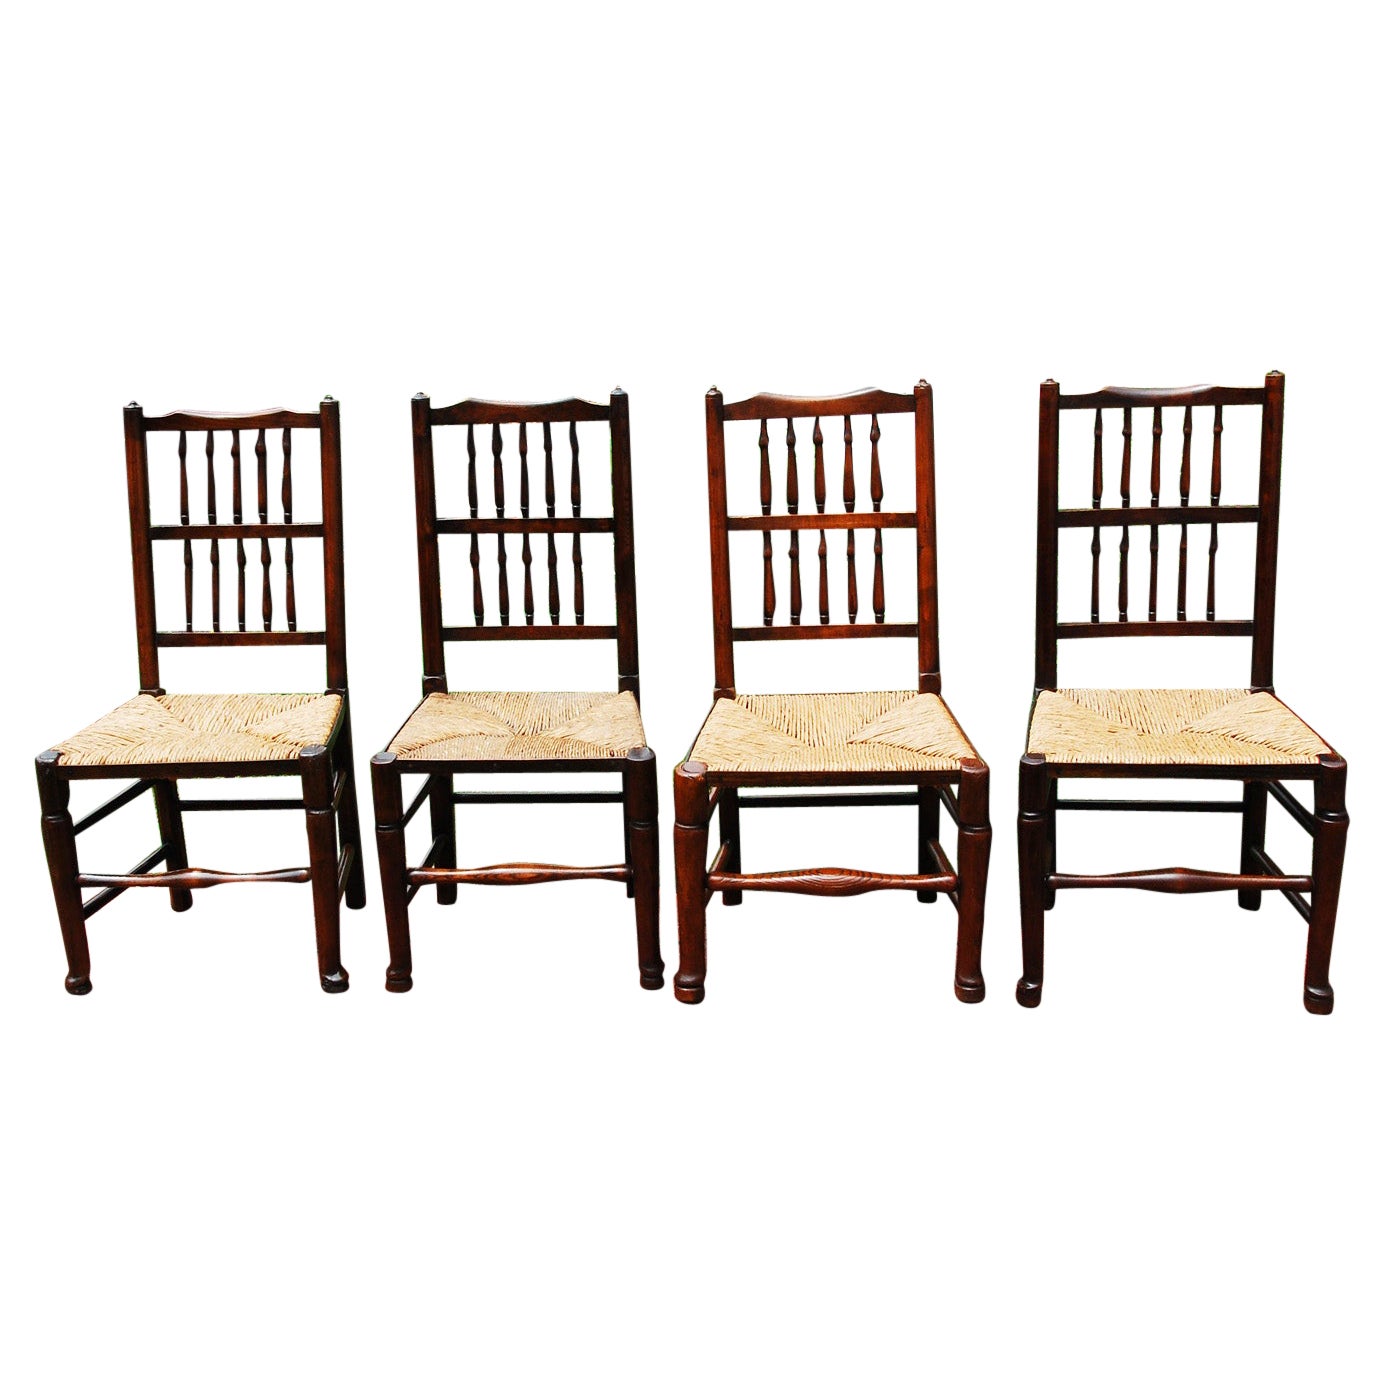 English Early 19th Century Assembled Set of Four Lancashire Spindleback Chairs